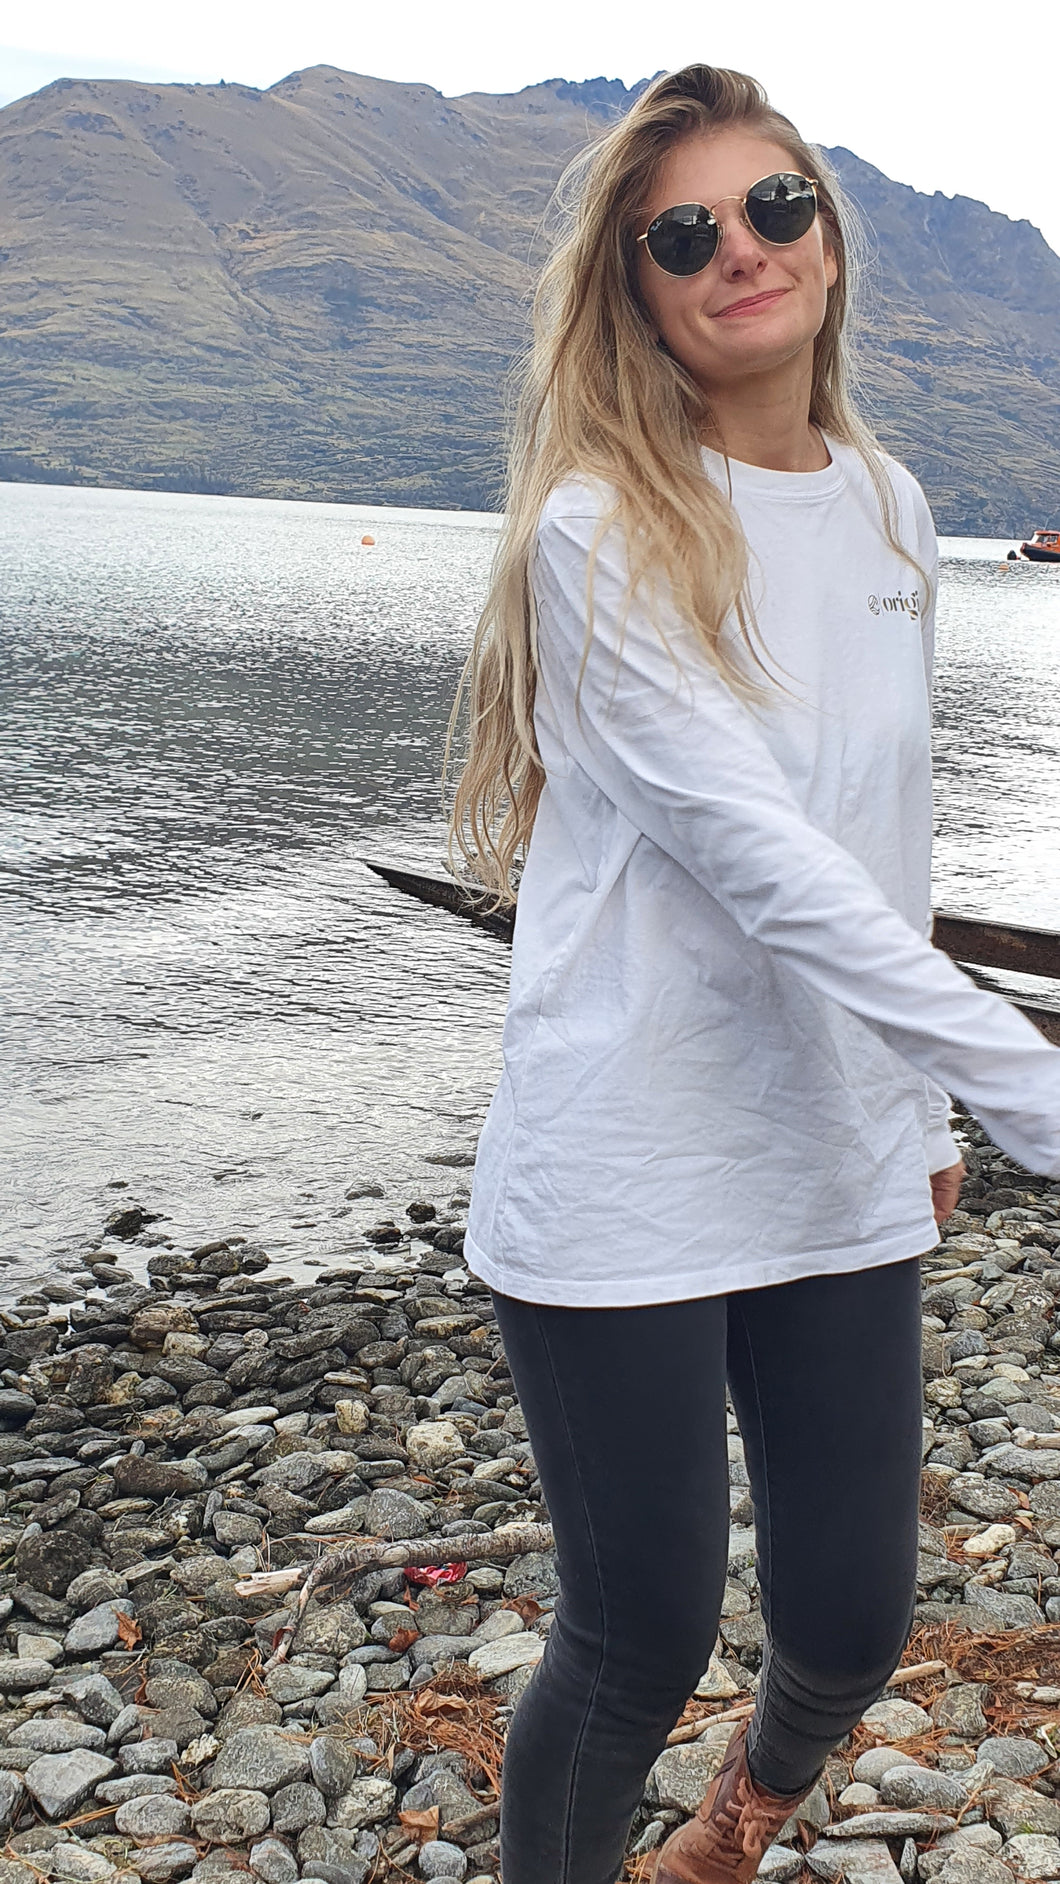 Zoey sporting out Long sleeve white organic cotton top